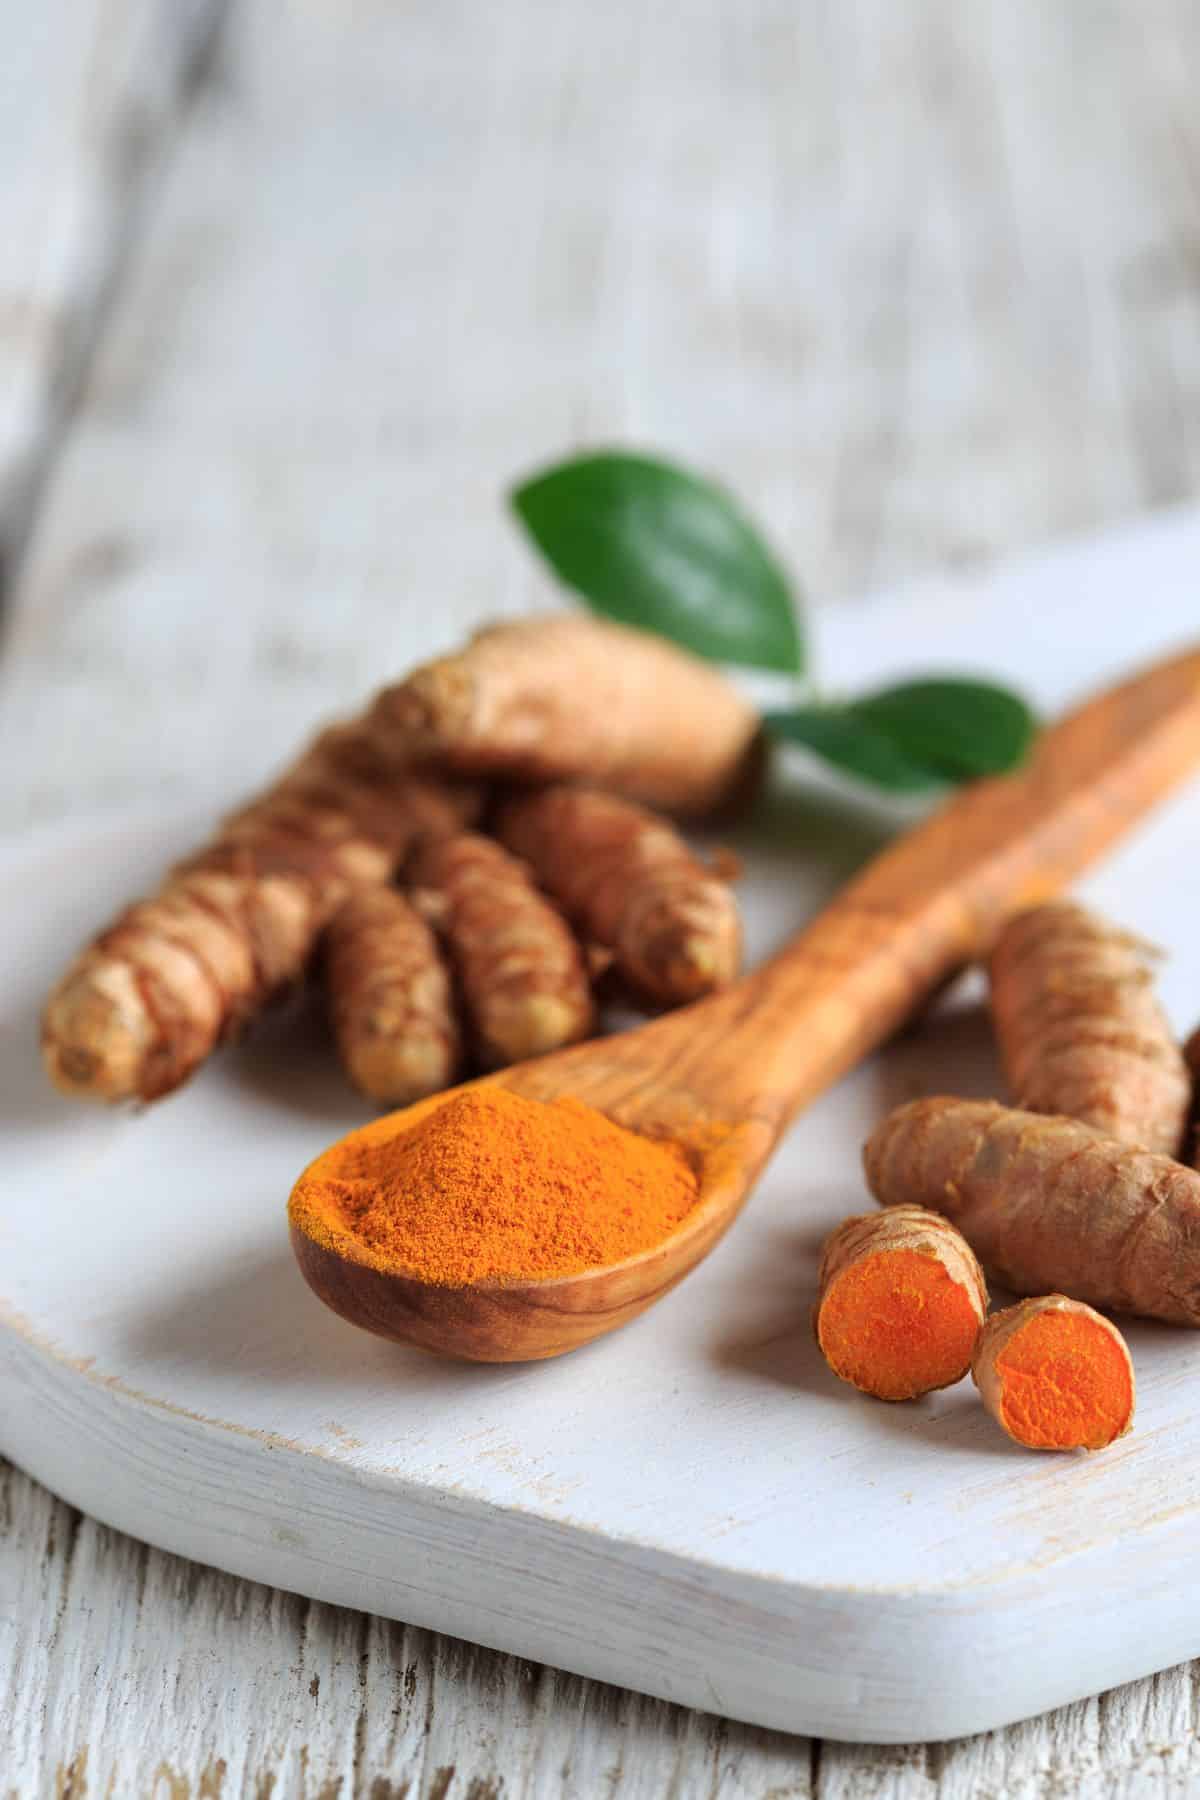 turmeric on a wooden spoon, surrounded by whole pieces of turmeric.